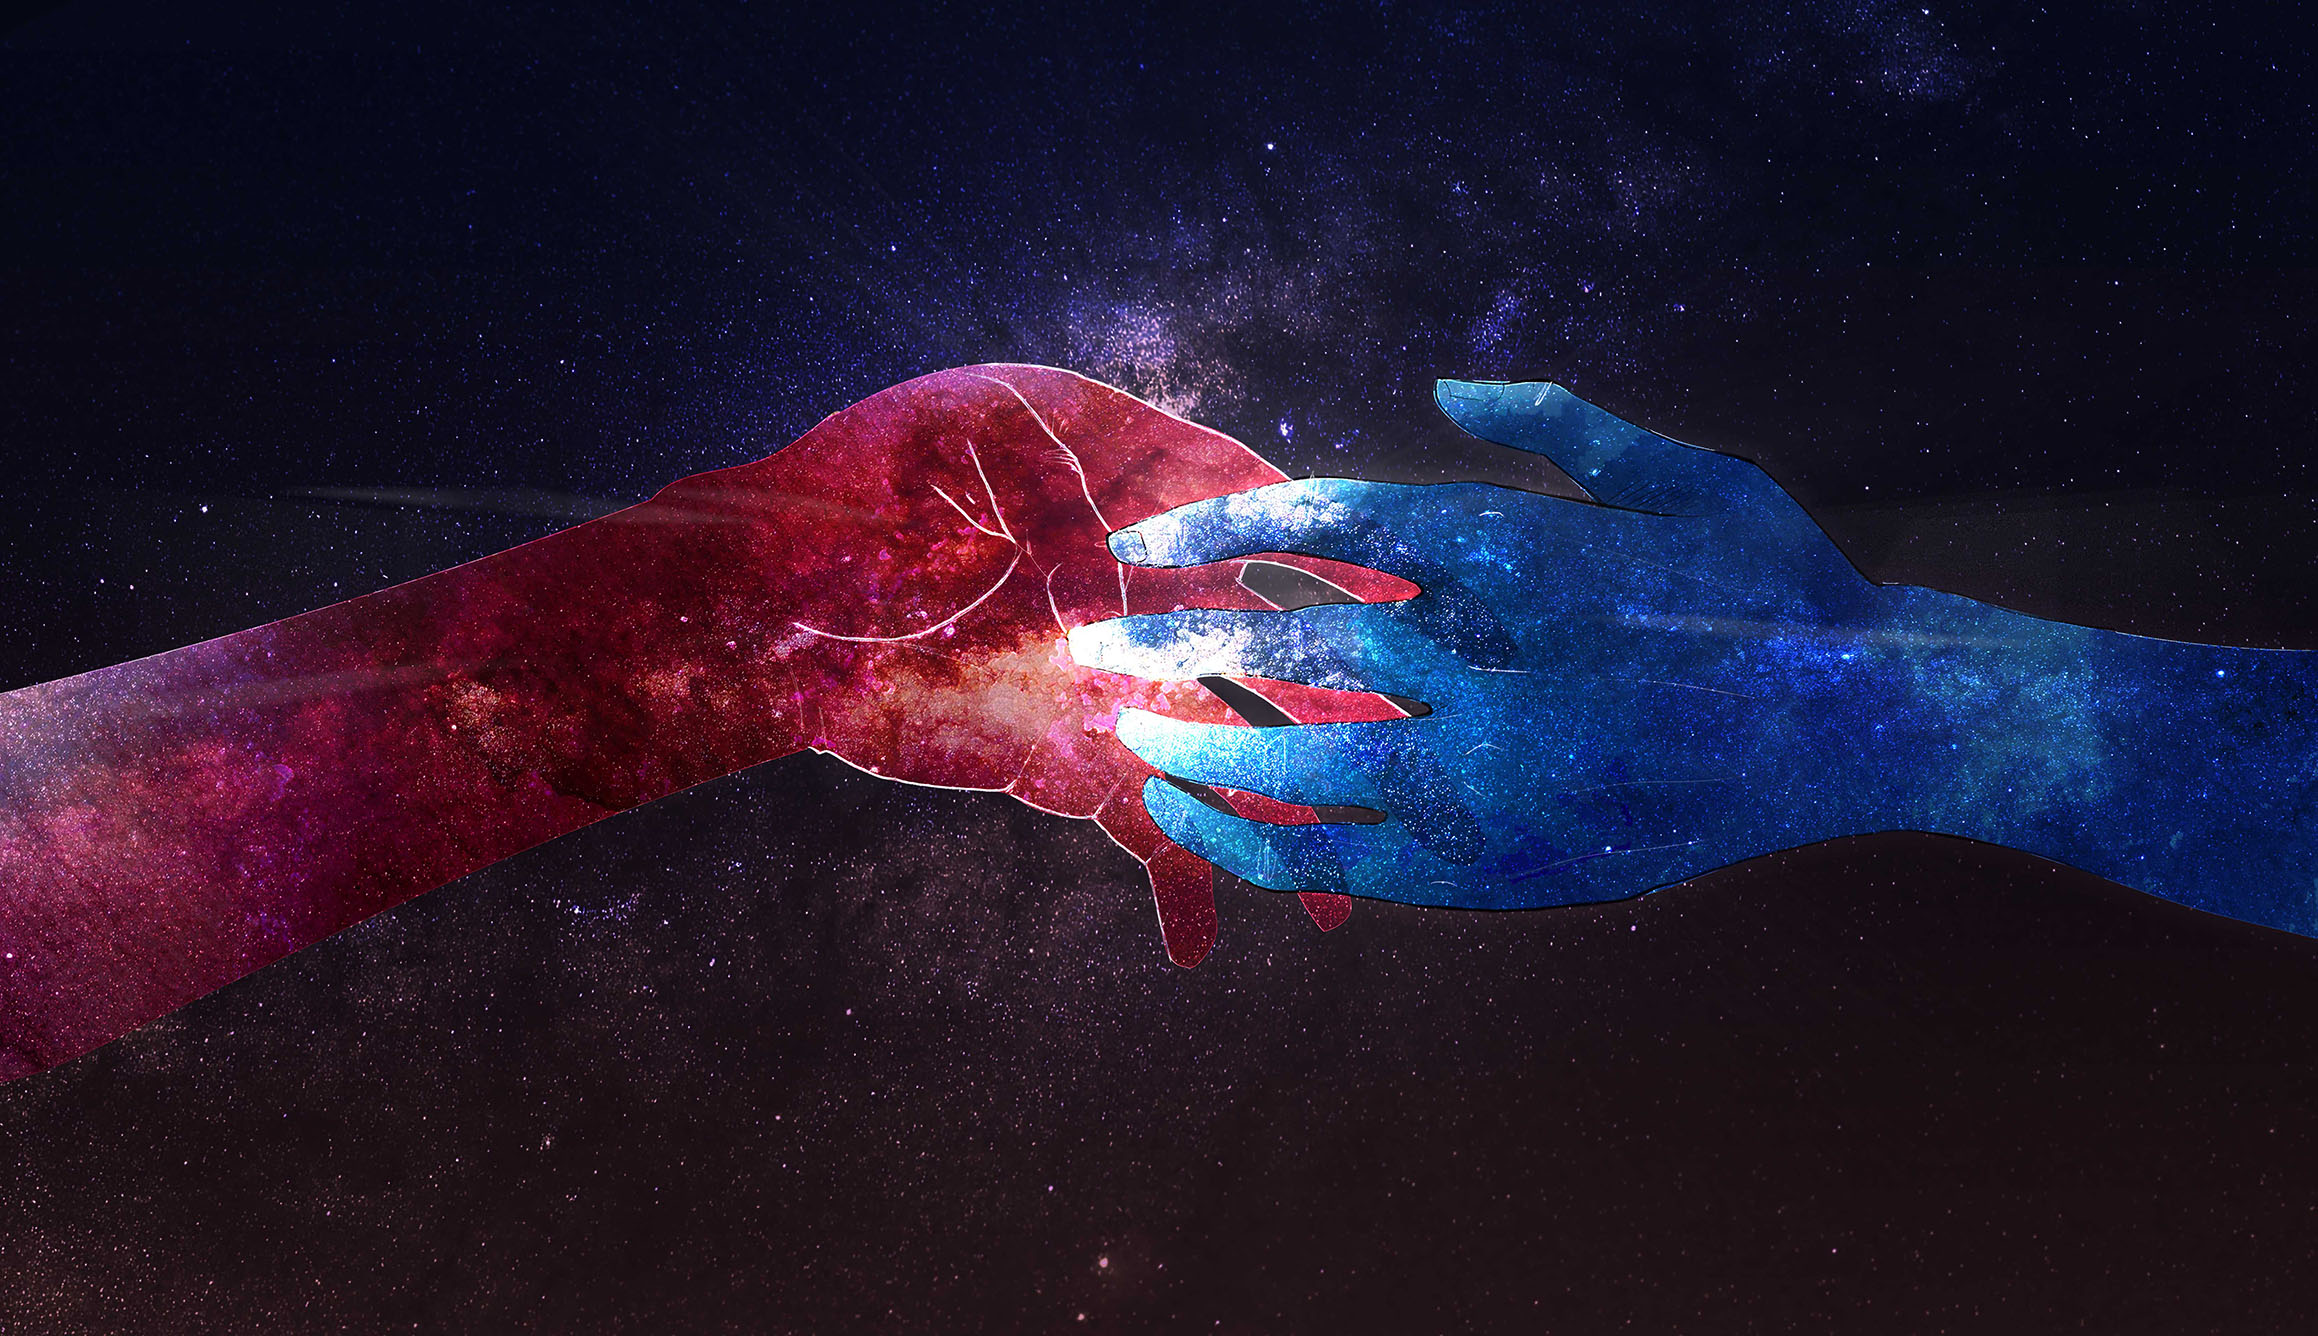 Digital Illustration of two cosmic hands reaching for each other.